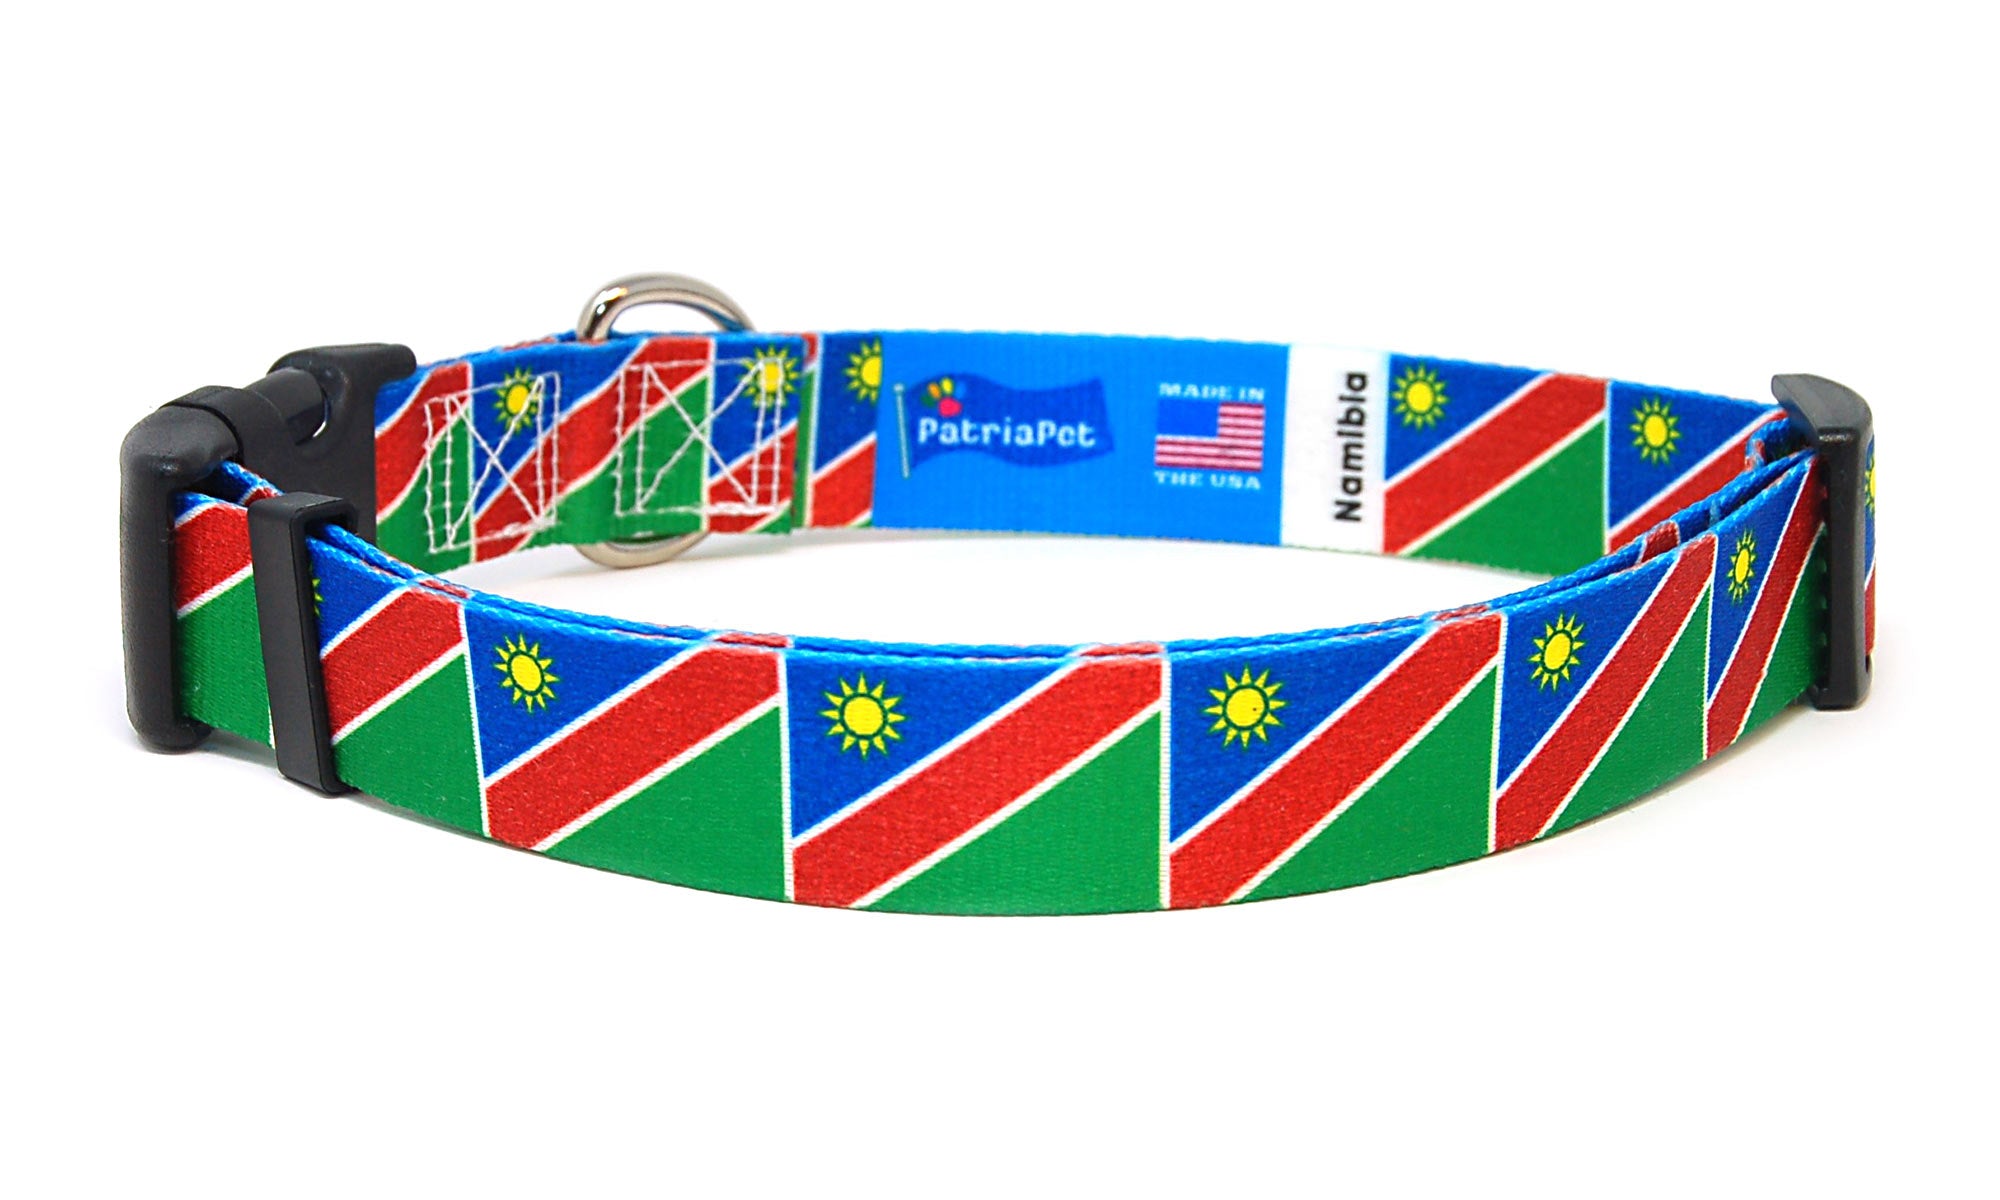 Namibia Dog Collar | Quick Release or Martingale Style | Made in NJ, USA